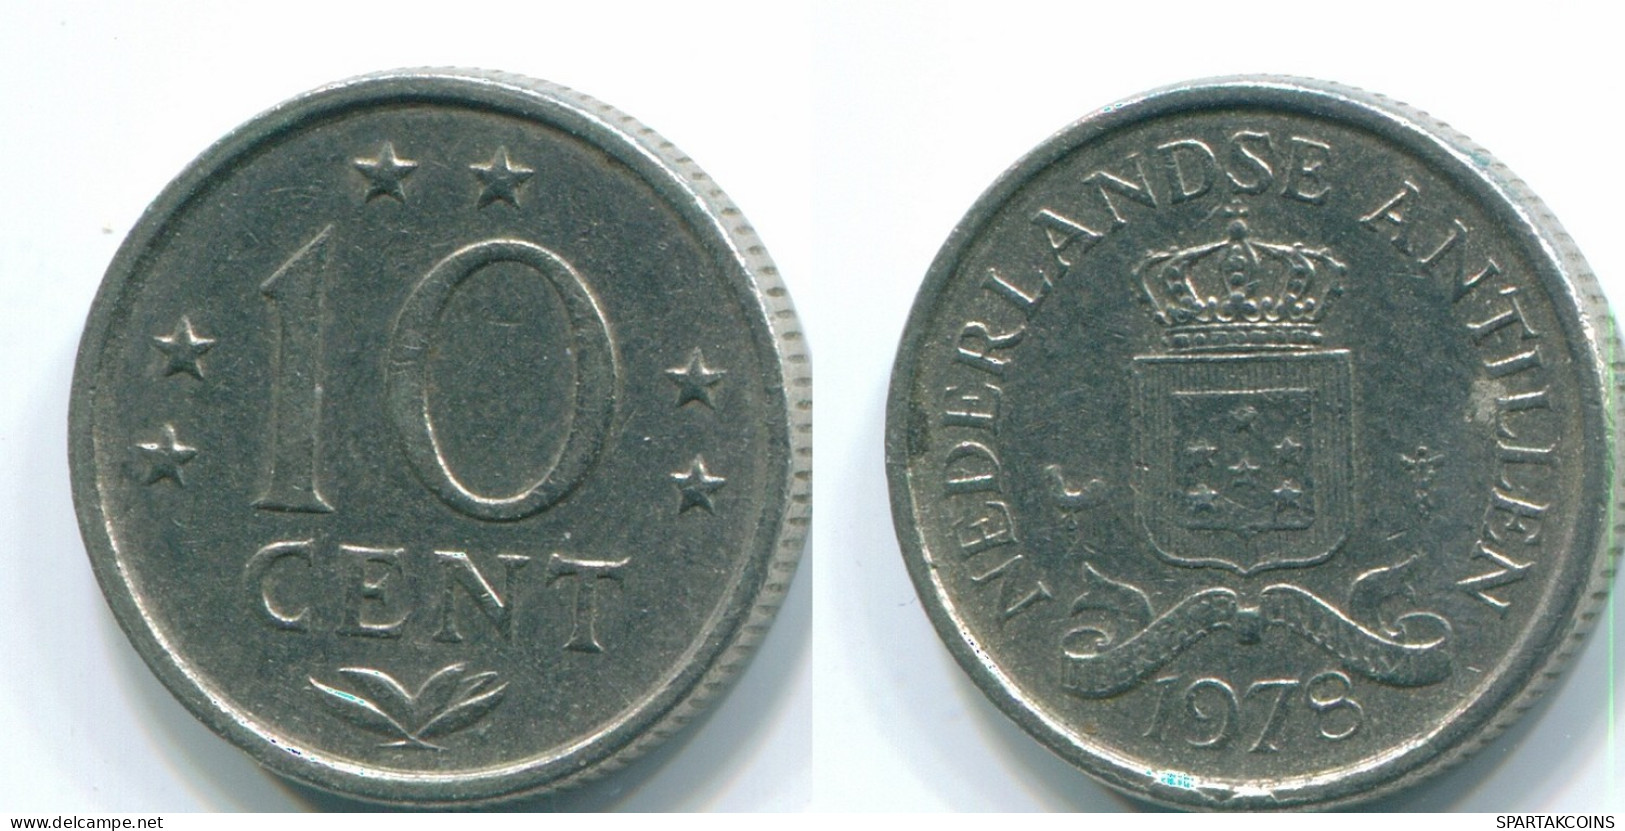 10 CENTS 1978 NETHERLANDS ANTILLES Nickel Colonial Coin #S13581.U.A - Netherlands Antilles